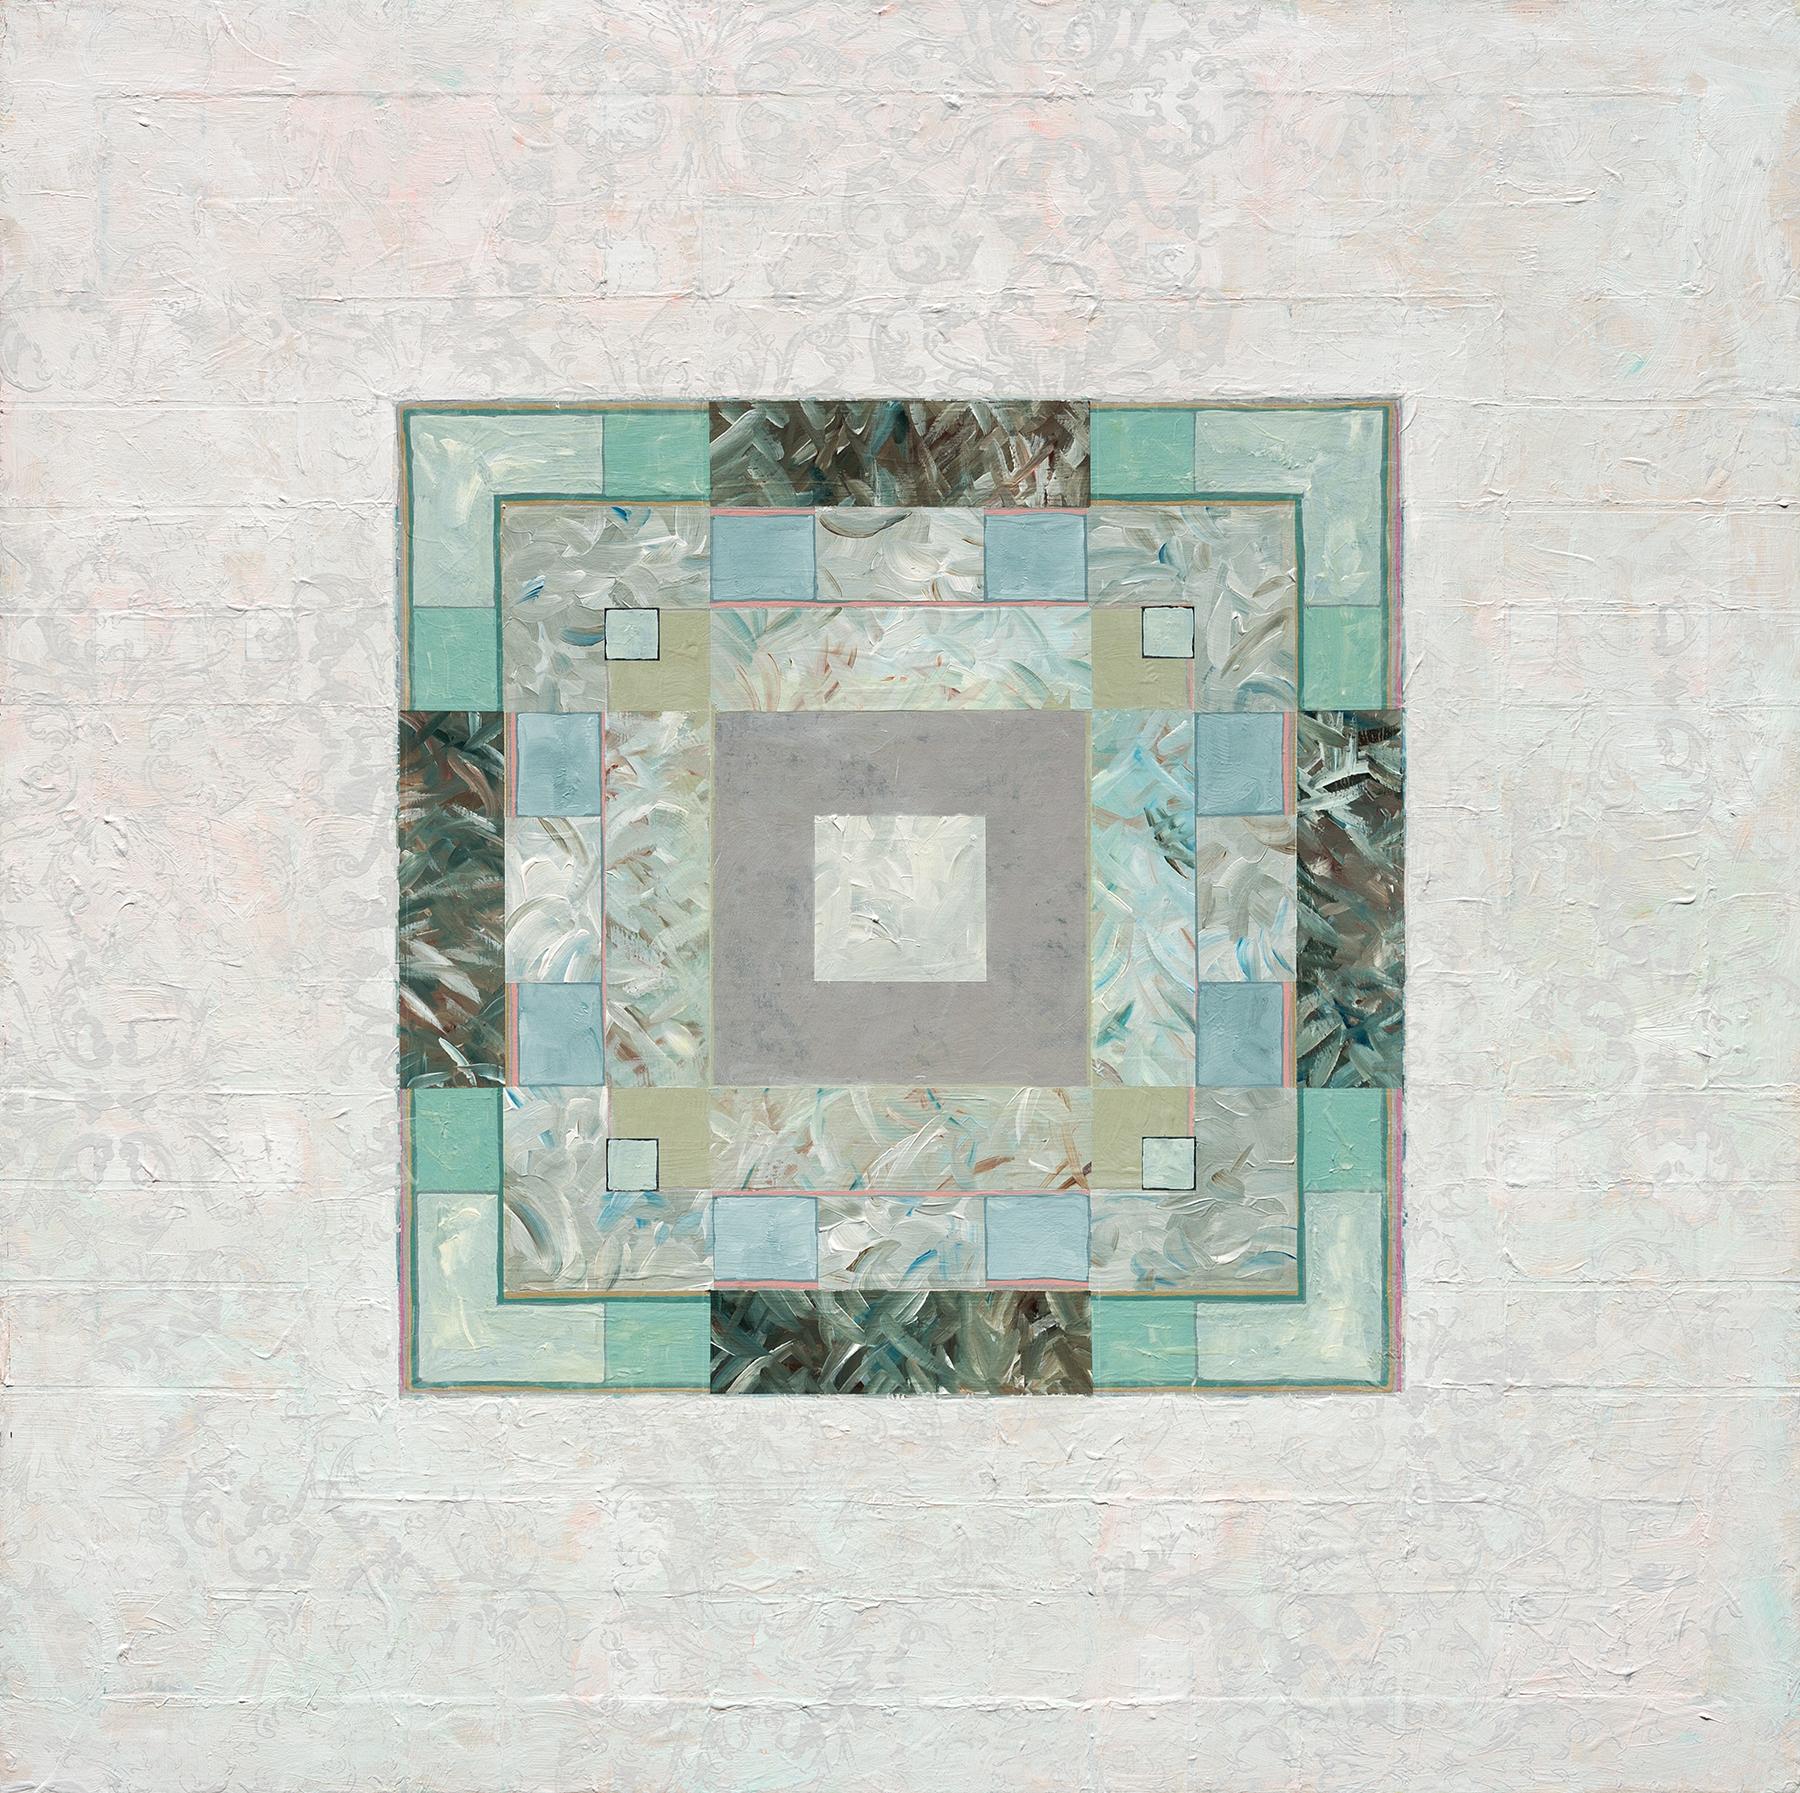 Elegance: contemporary geometric abstract painting w/ leaves -green, white, gray